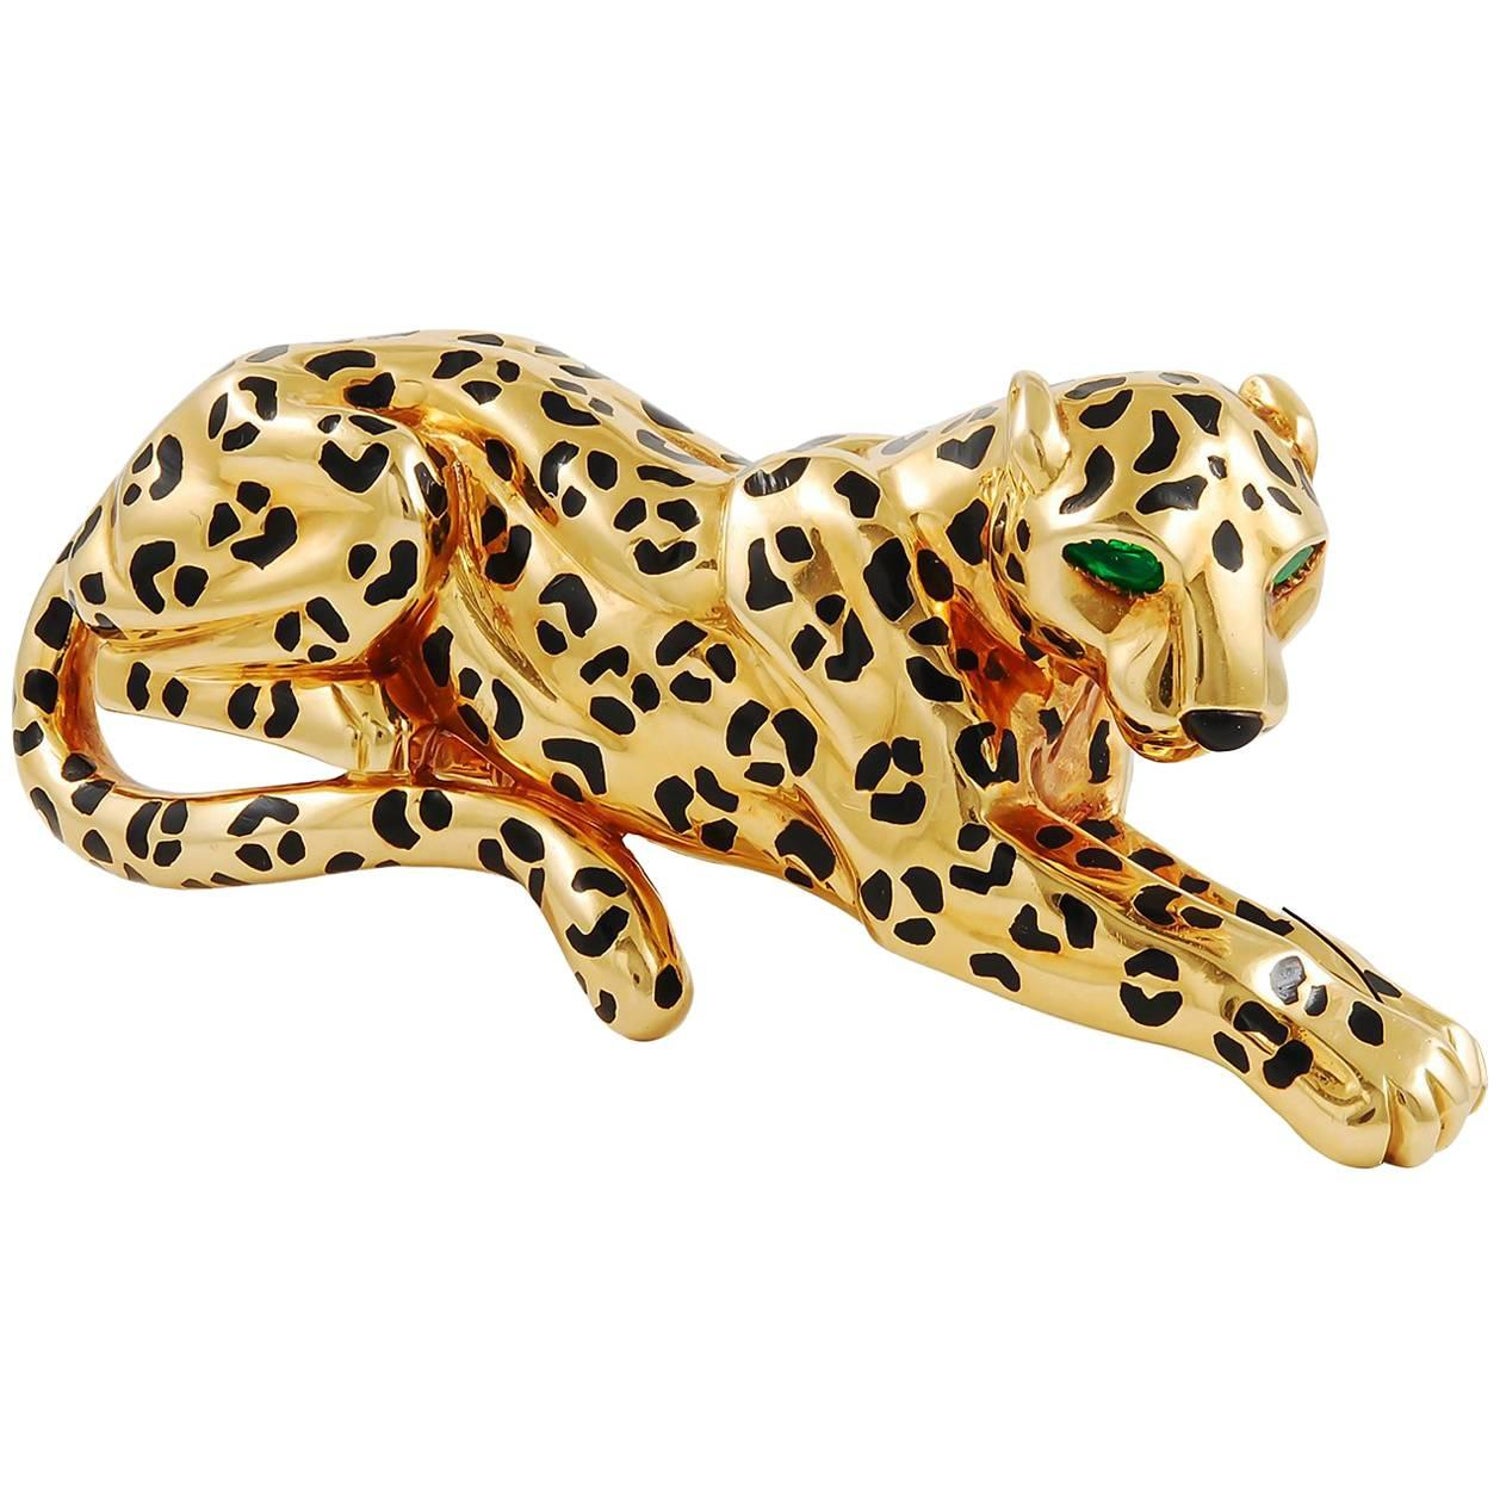 Cartier Panther Gold Brooch at 1stdibs